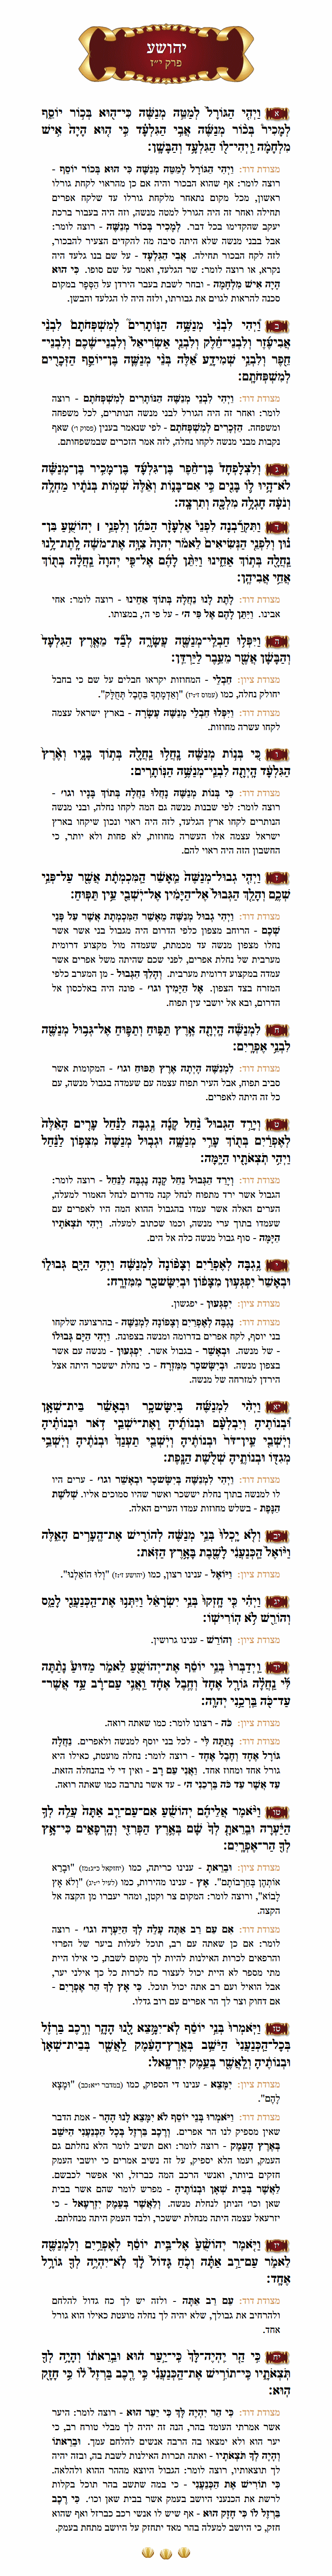 Sefer Yehoshua Chapter 17 with commentary